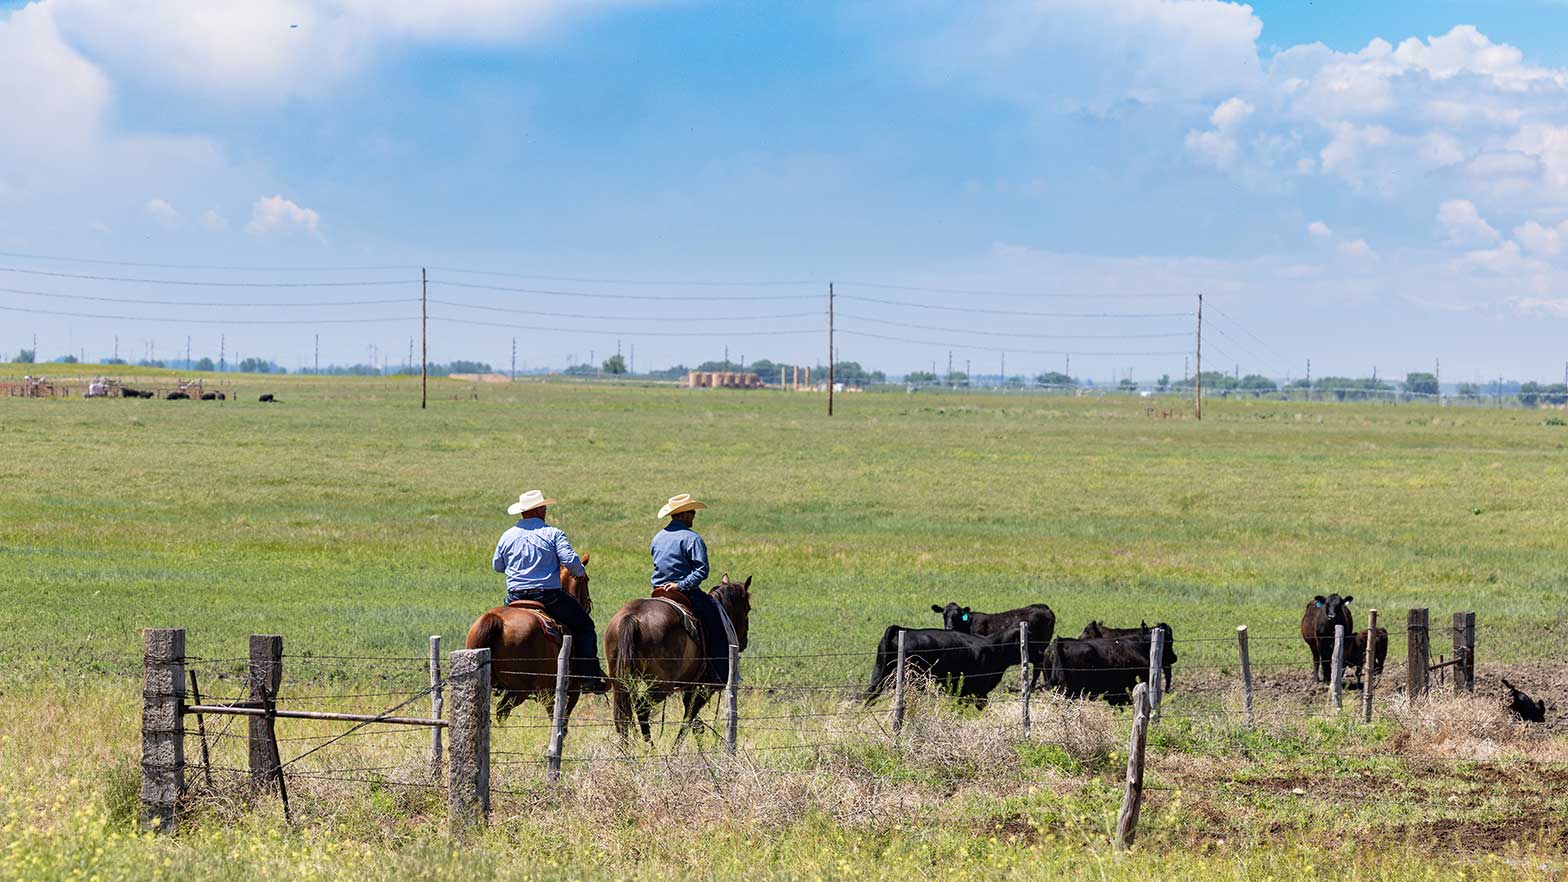 Cowboys round up cattle on the ranch with oil and gas equipment pictured in the distance